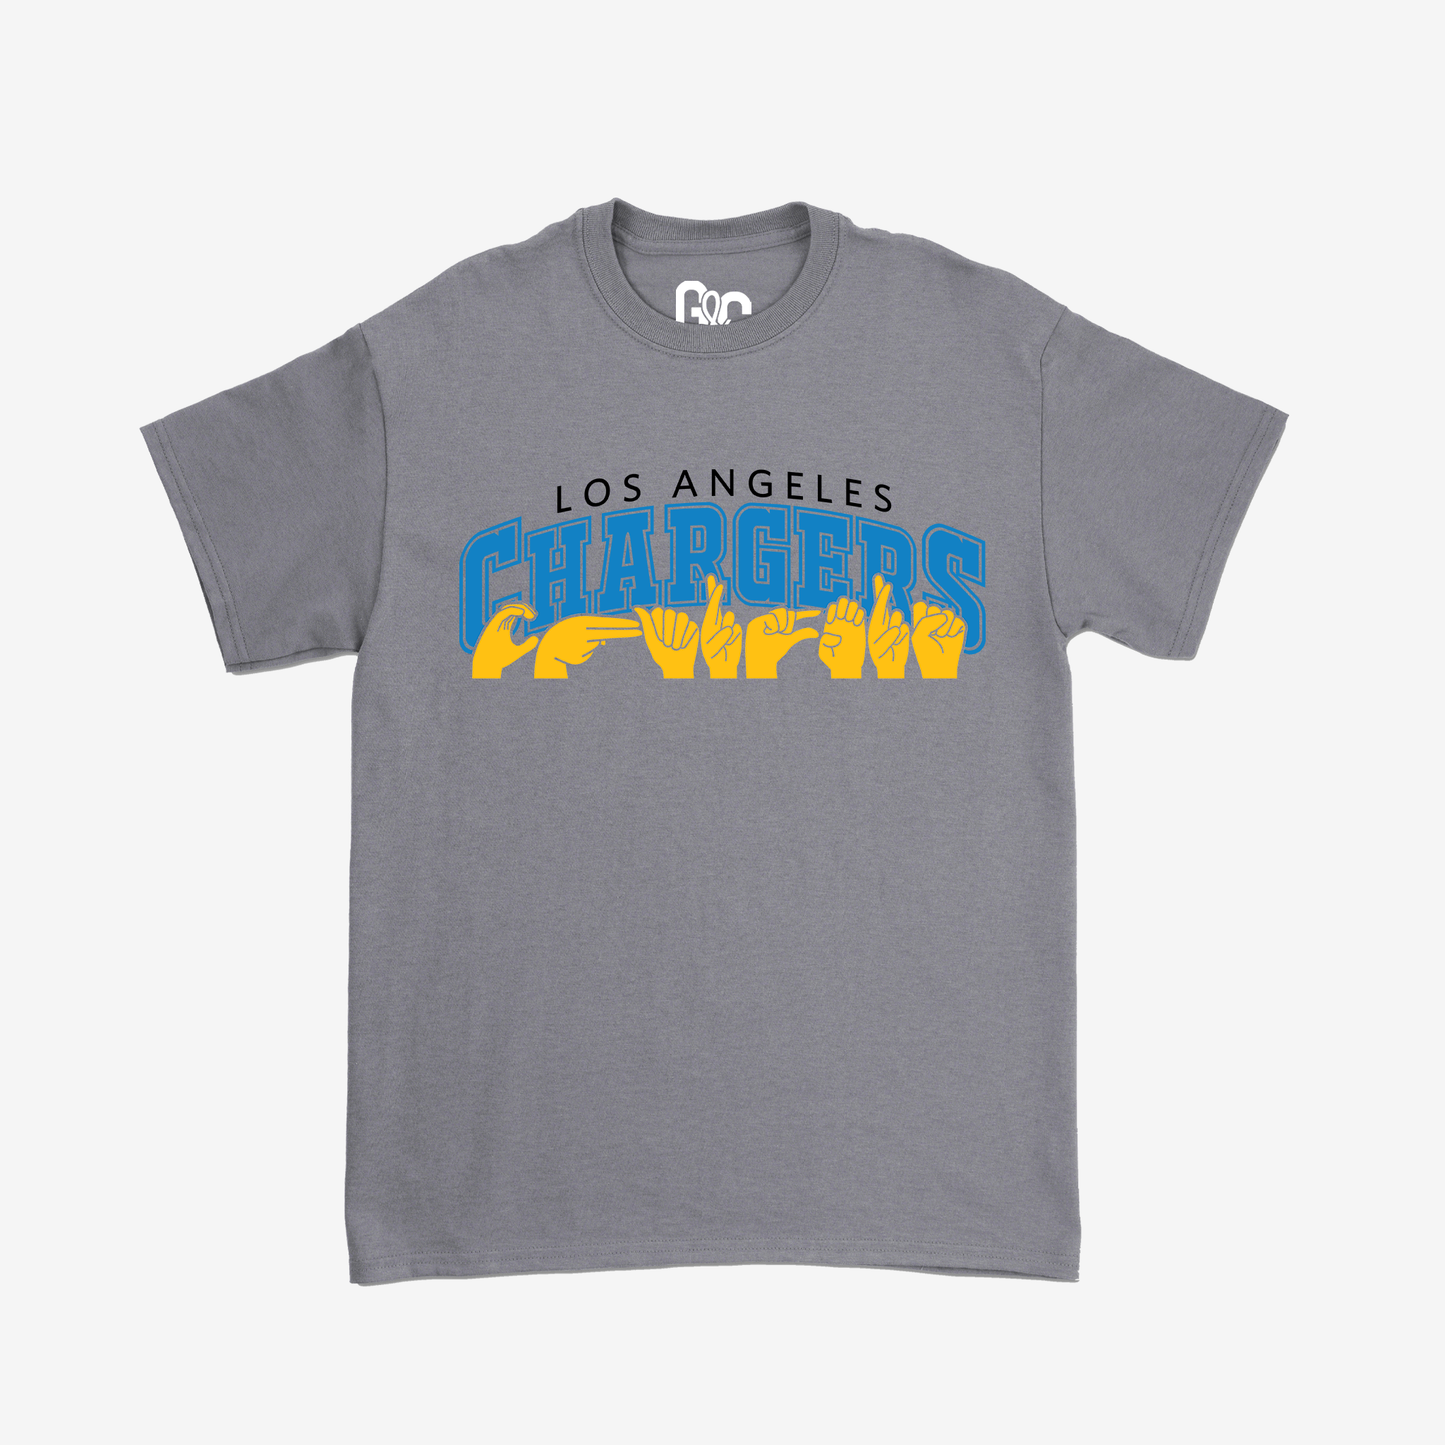 Los Angeles Chargers Tee